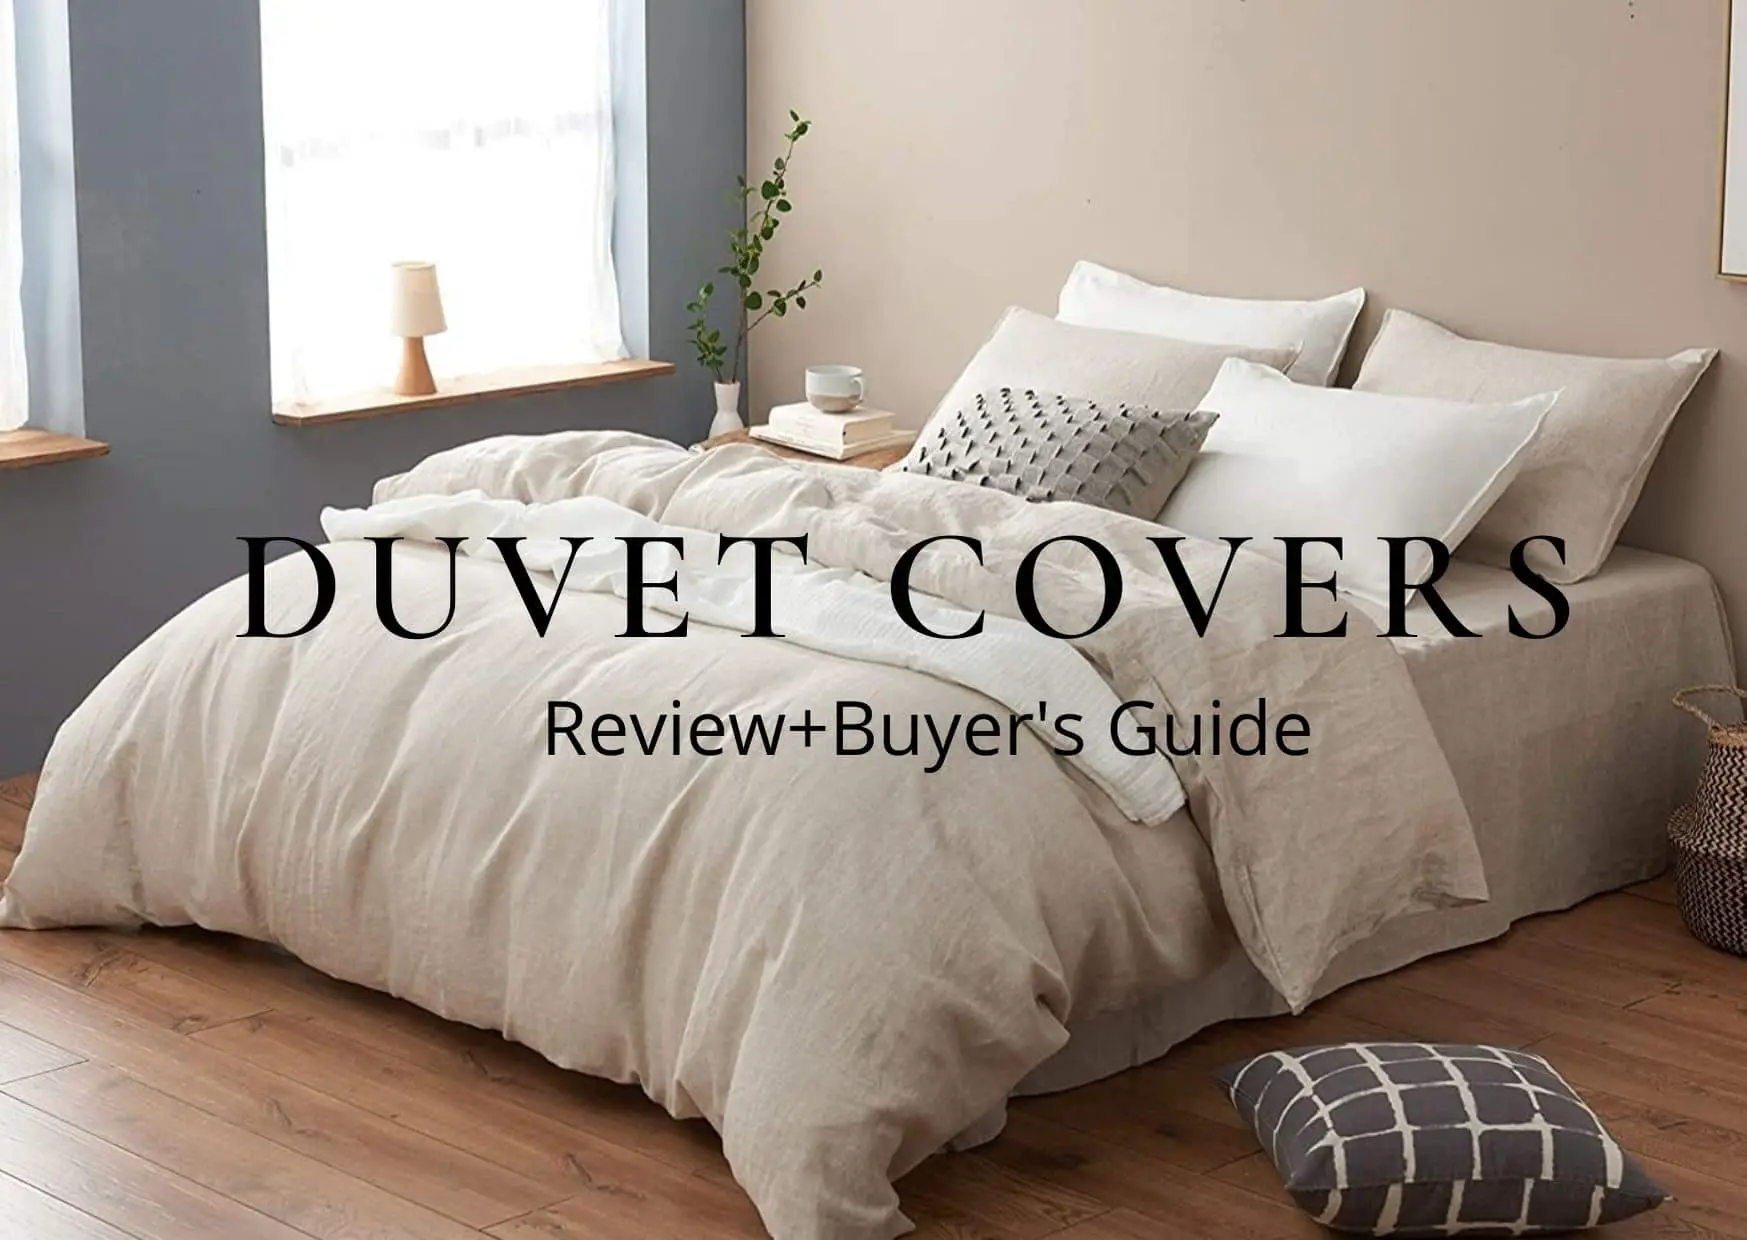 Amazon’s 10 Best Duvet Covers: Review + Buyer’s Guide